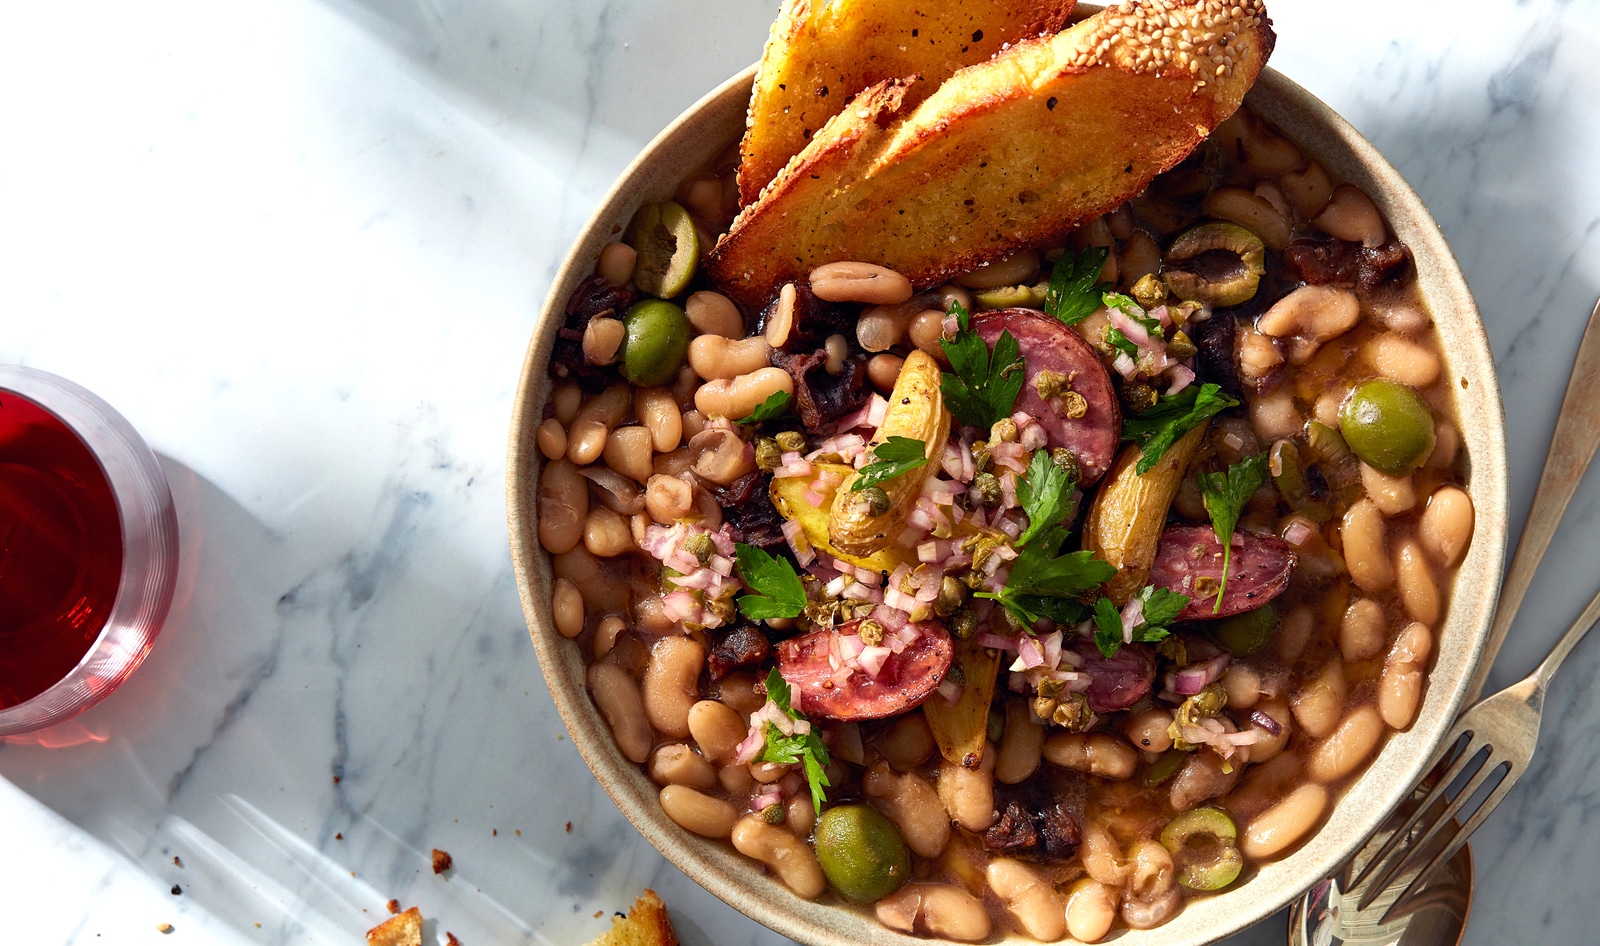 Are All Canned Beans the Same? A Nutritionist Weighs In